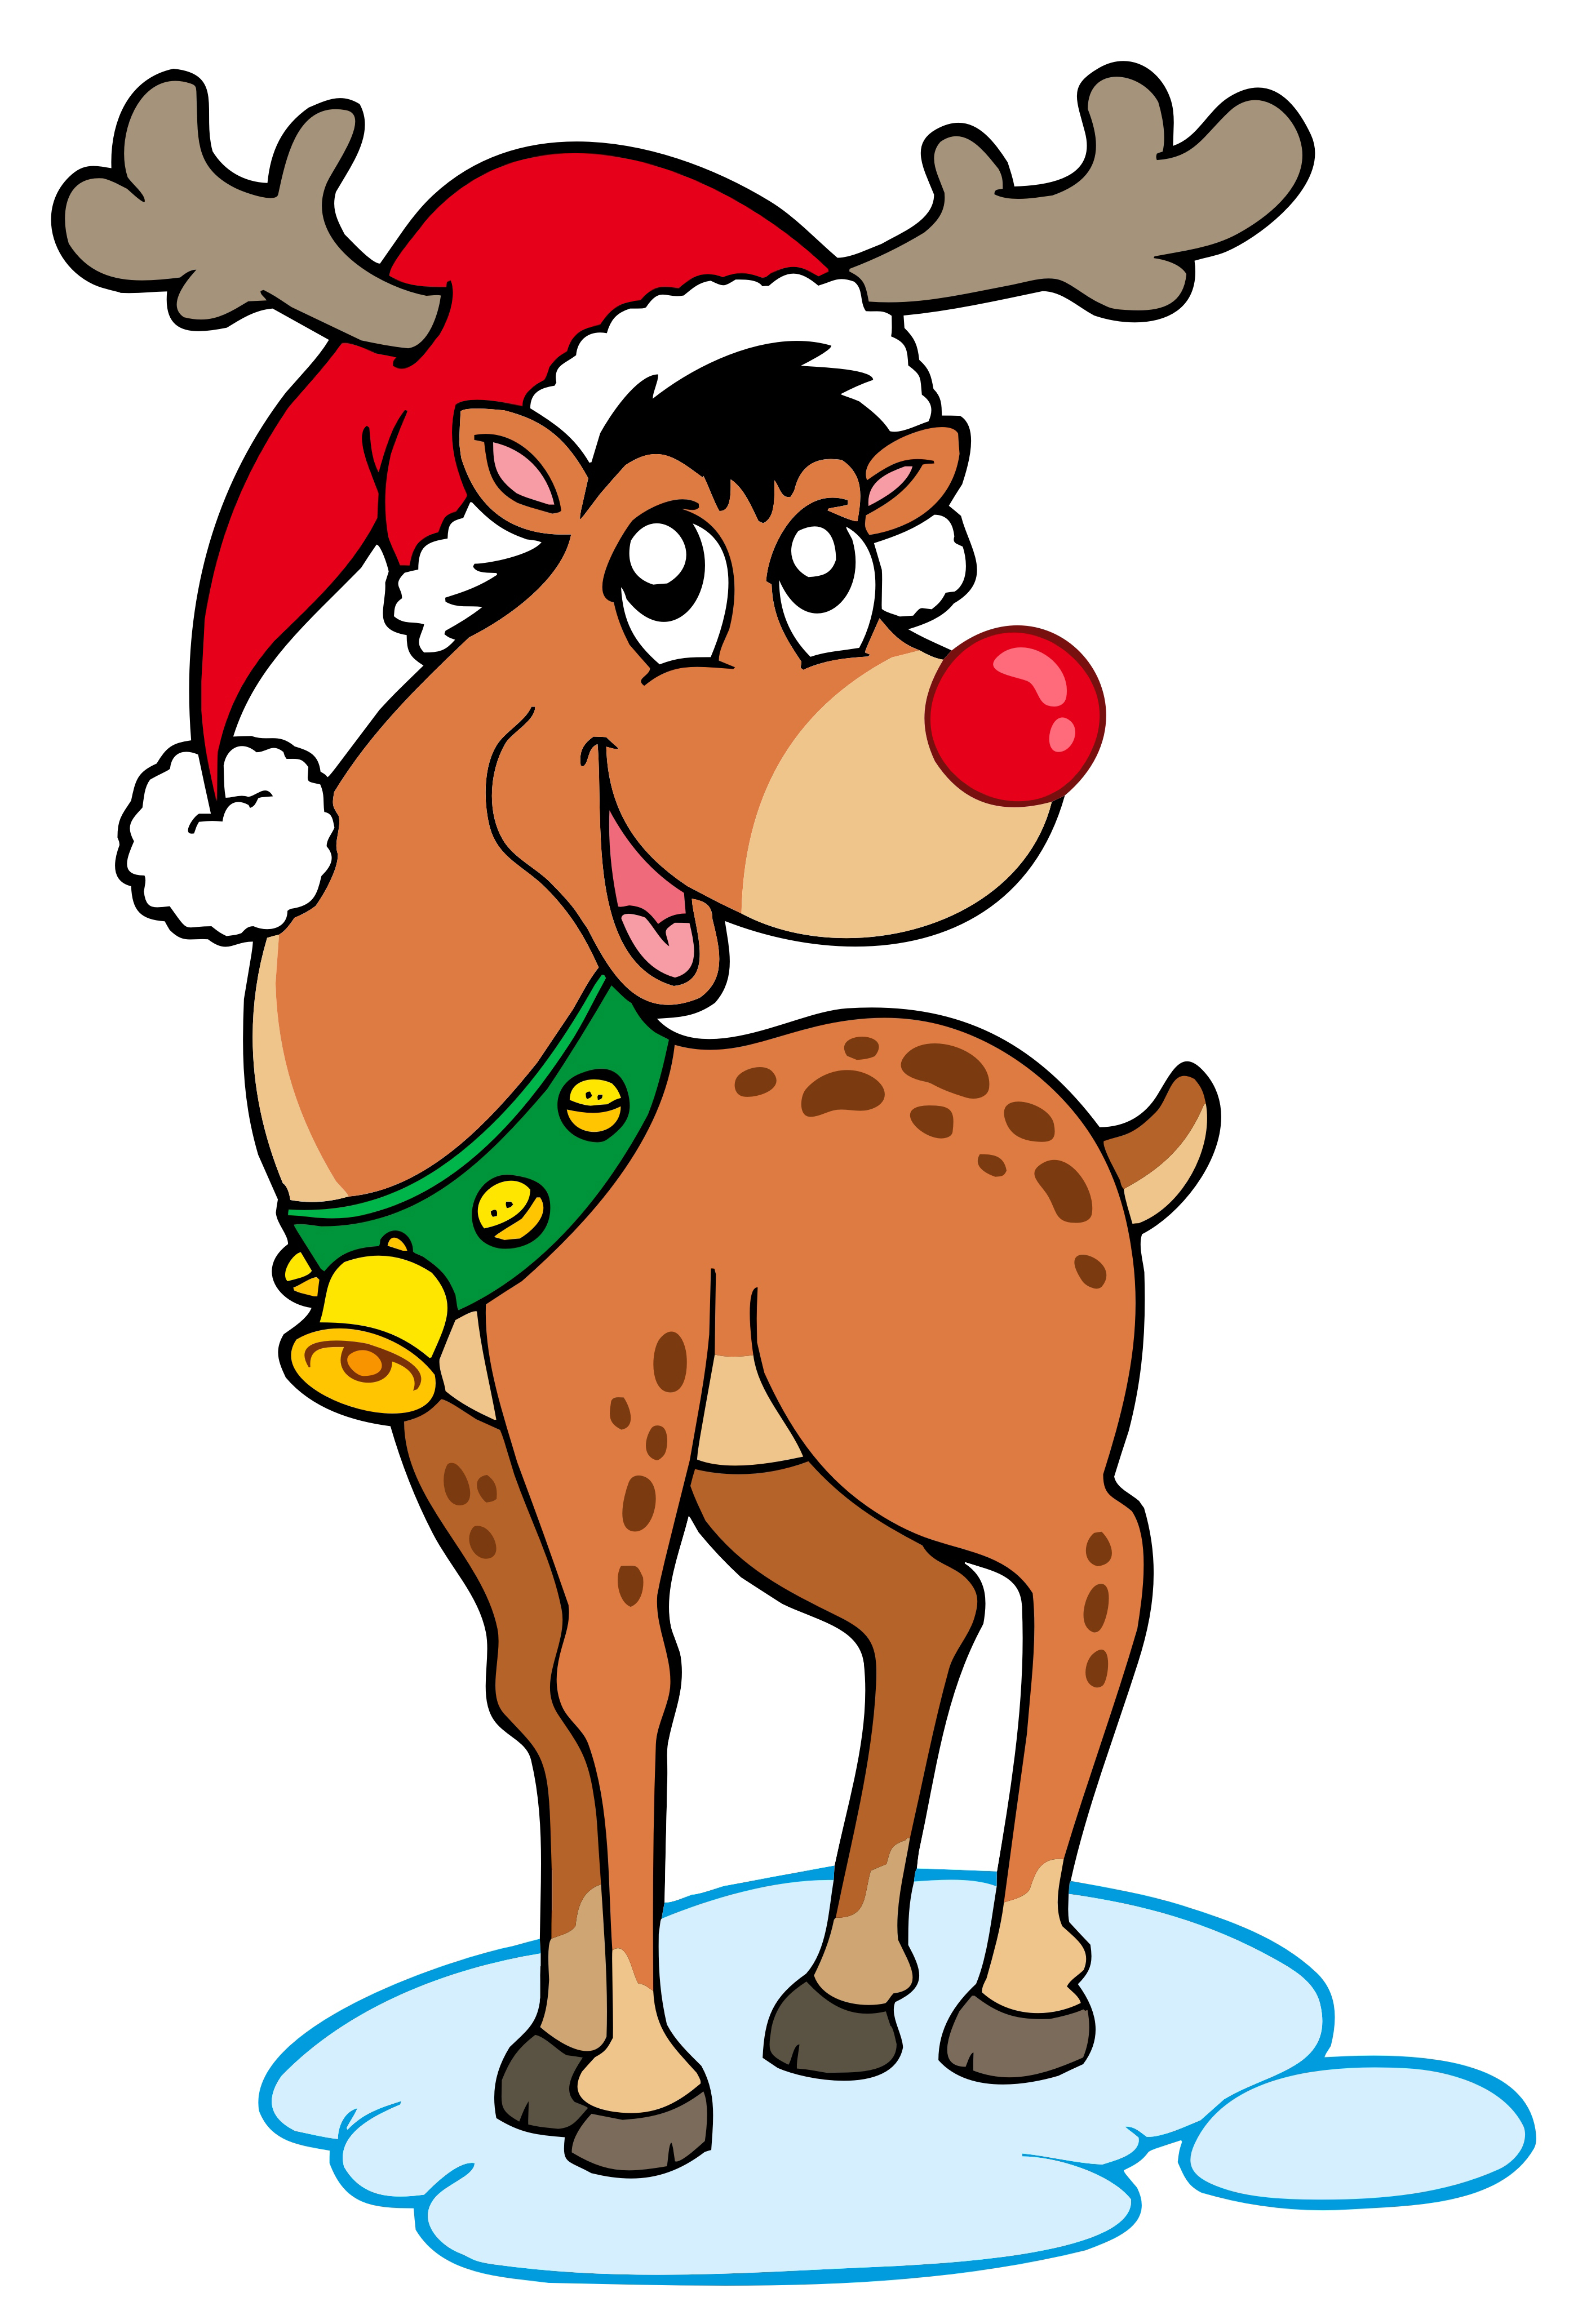 rudolf the rednosed reindeer clipart - Clip Art Library